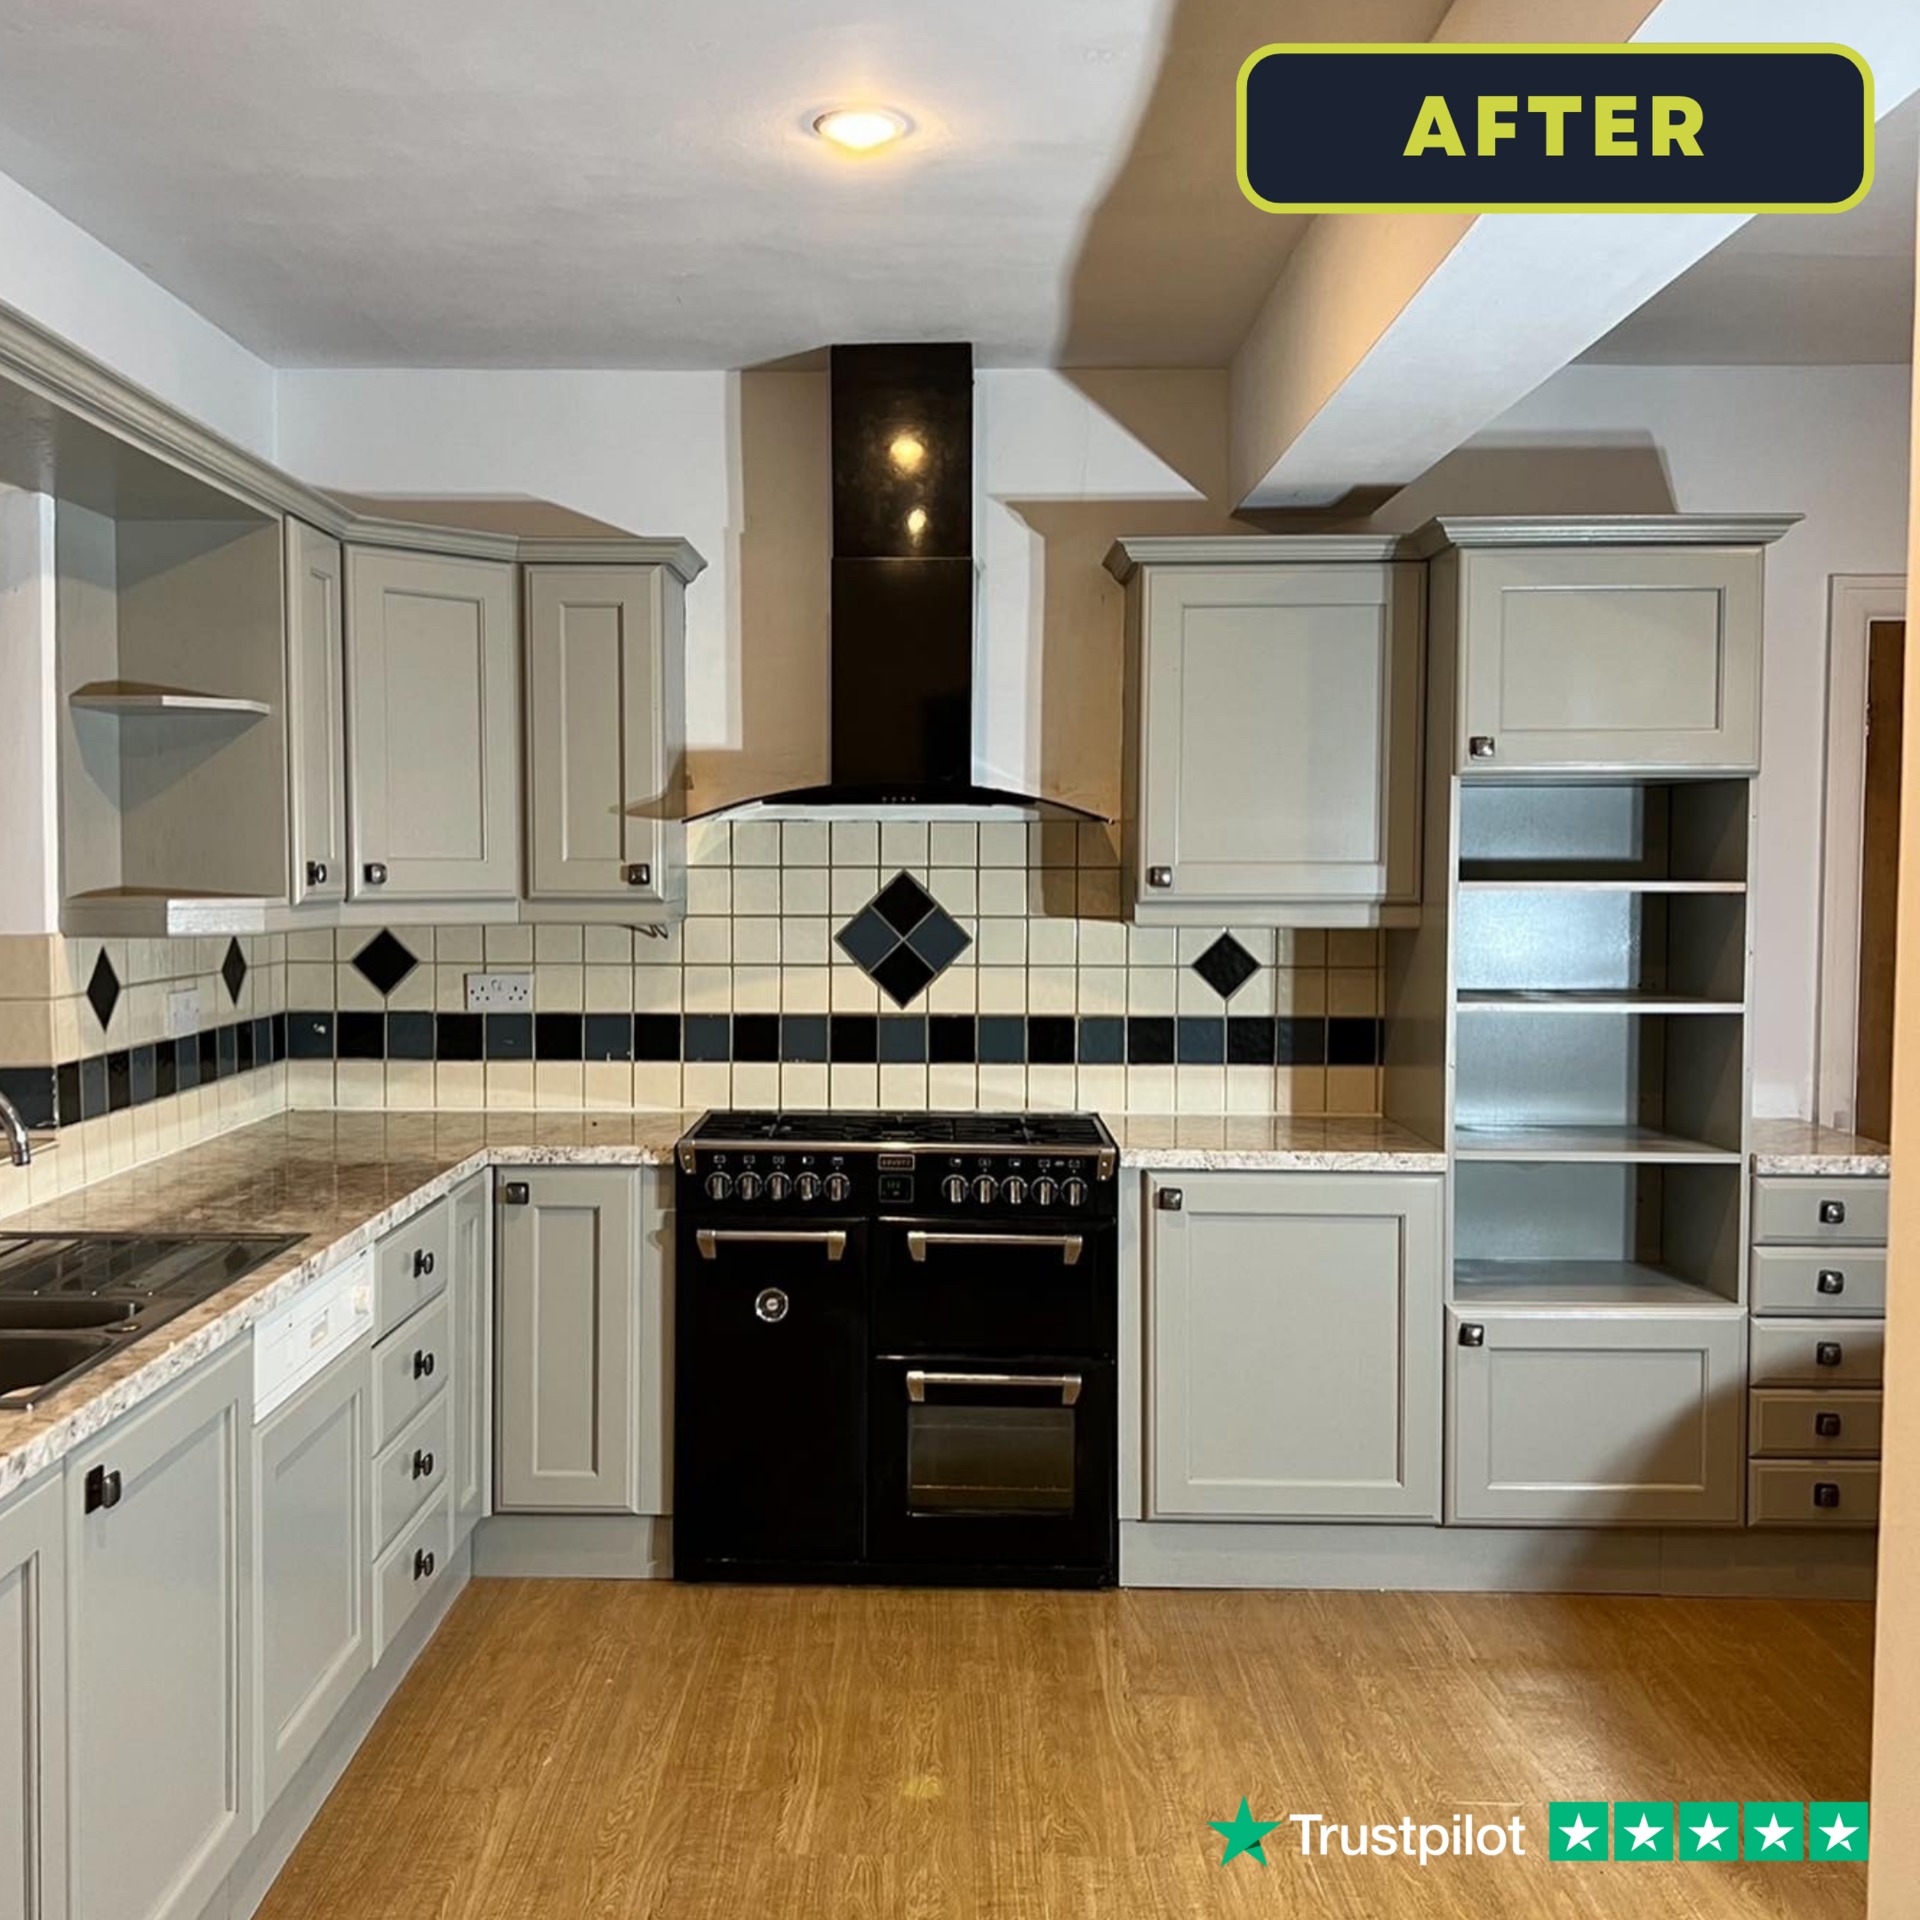 Before and after comparison of kitchen spray painting